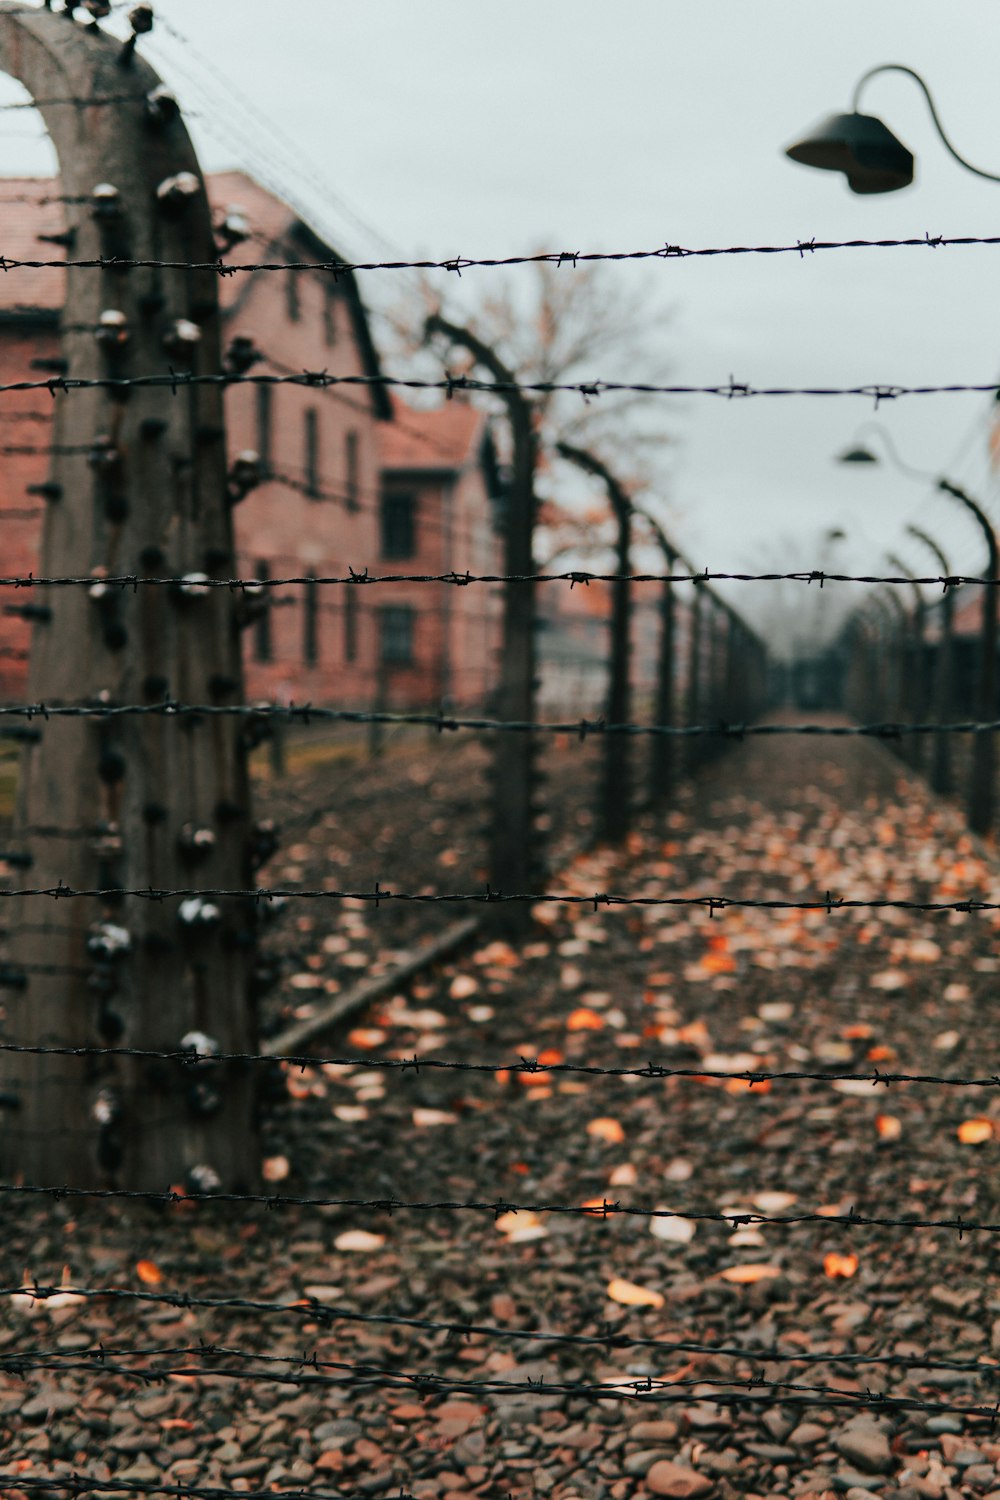 barbed wire fence in a concentration camp